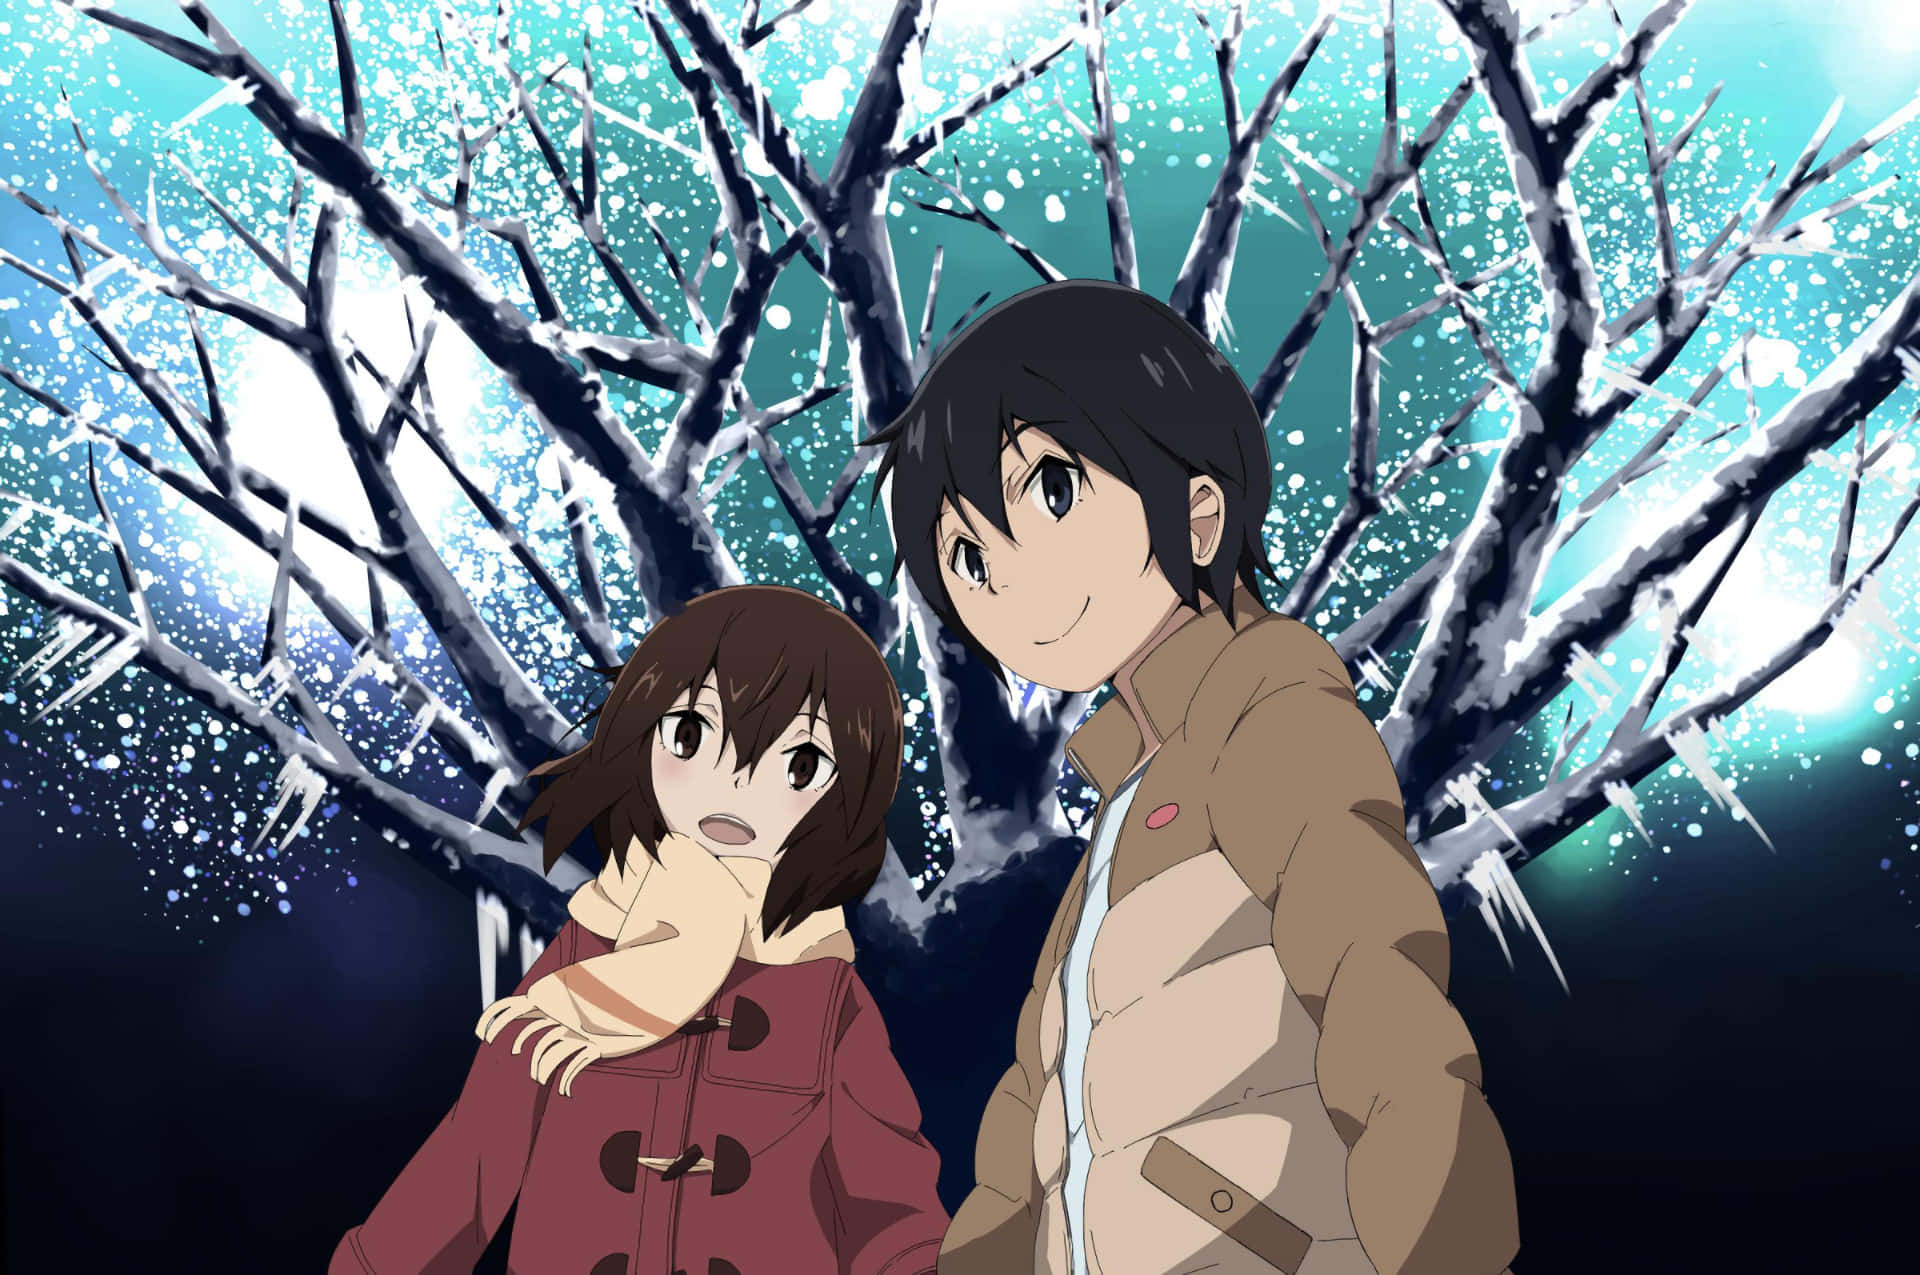 Free Erased Anime Wallpaper Downloads, [100+] Erased Anime Wallpapers for  FREE 